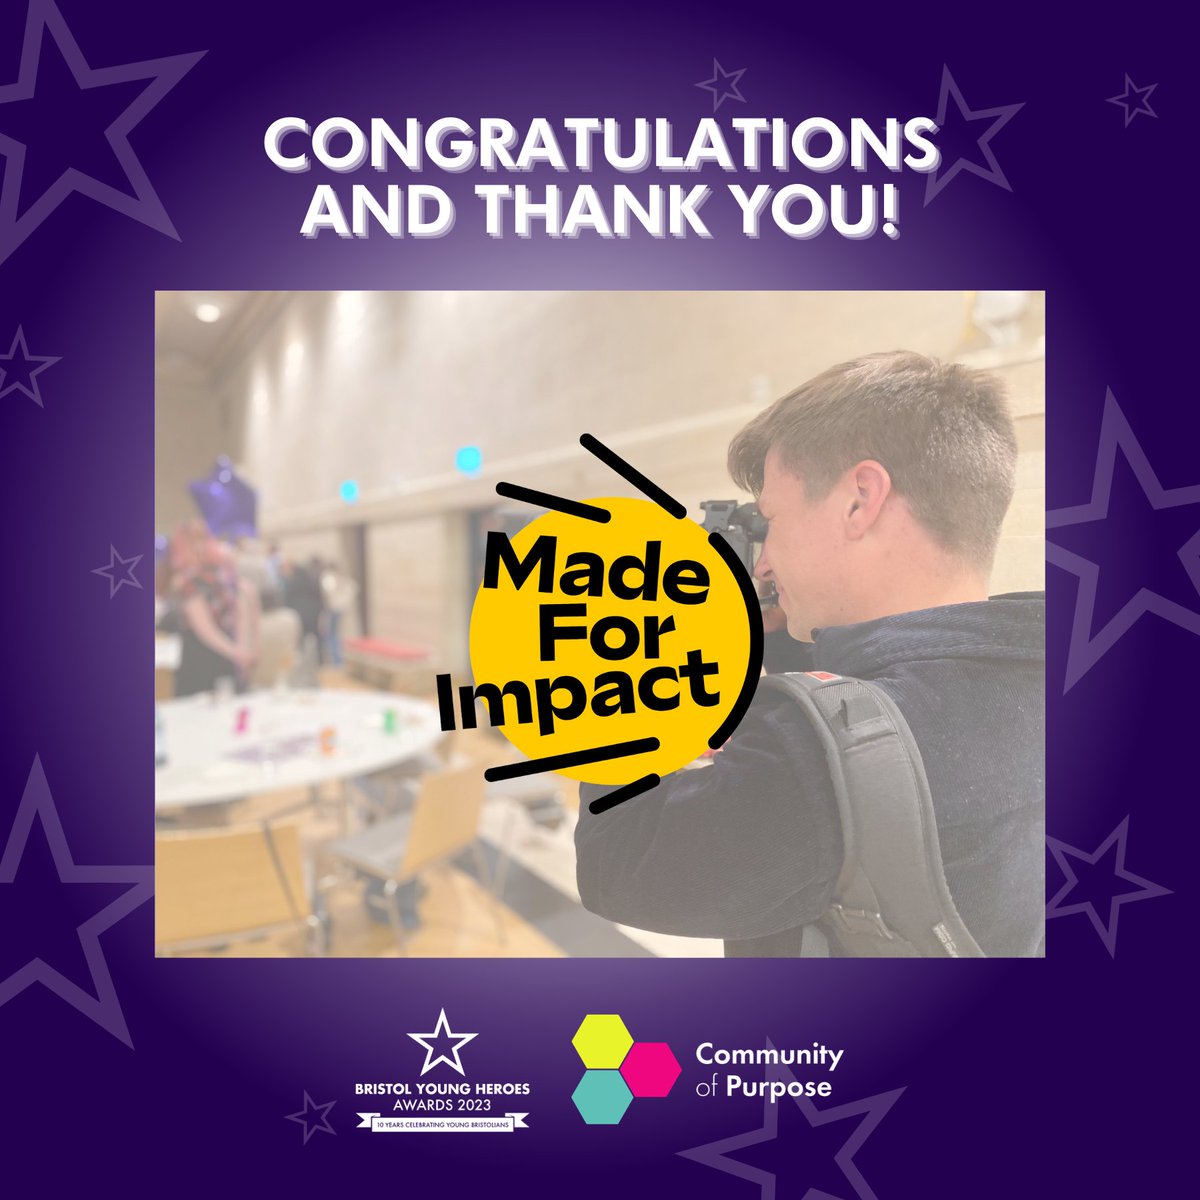 Dougie is our photographer & videographer, he helps out on all the projects that we run & this year is part of the delivery team for BYHA. Studio Duo has recently relaunched as @Made_For_Impact. Congratulations, we are so pleased for you! Thank you for all of your support!